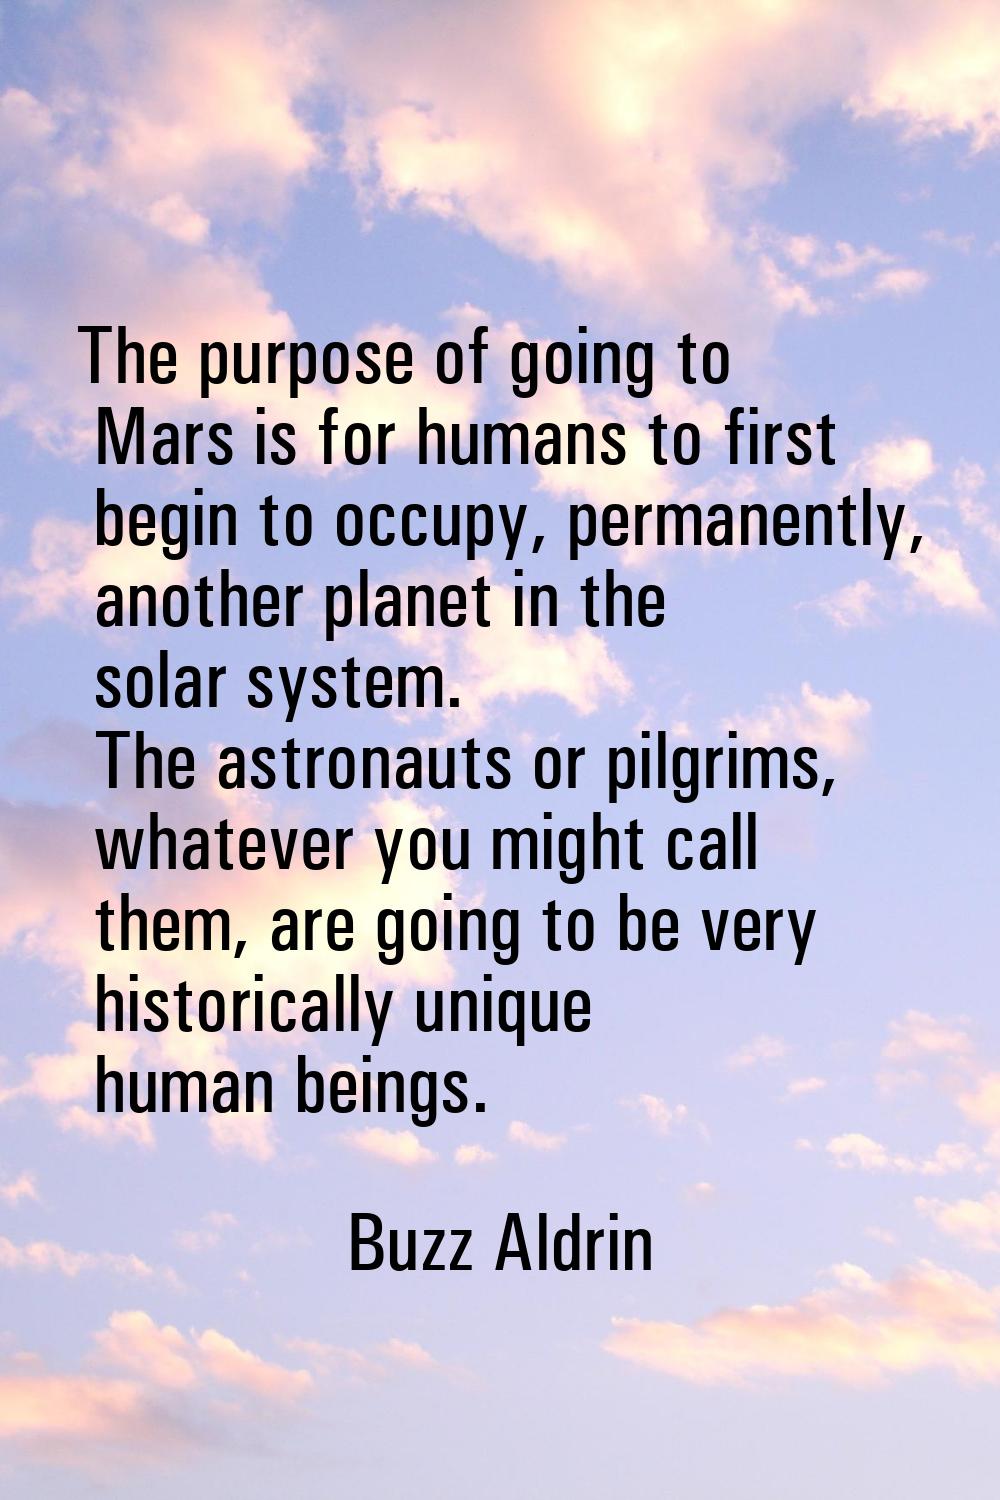 The purpose of going to Mars is for humans to first begin to occupy, permanently, another planet in